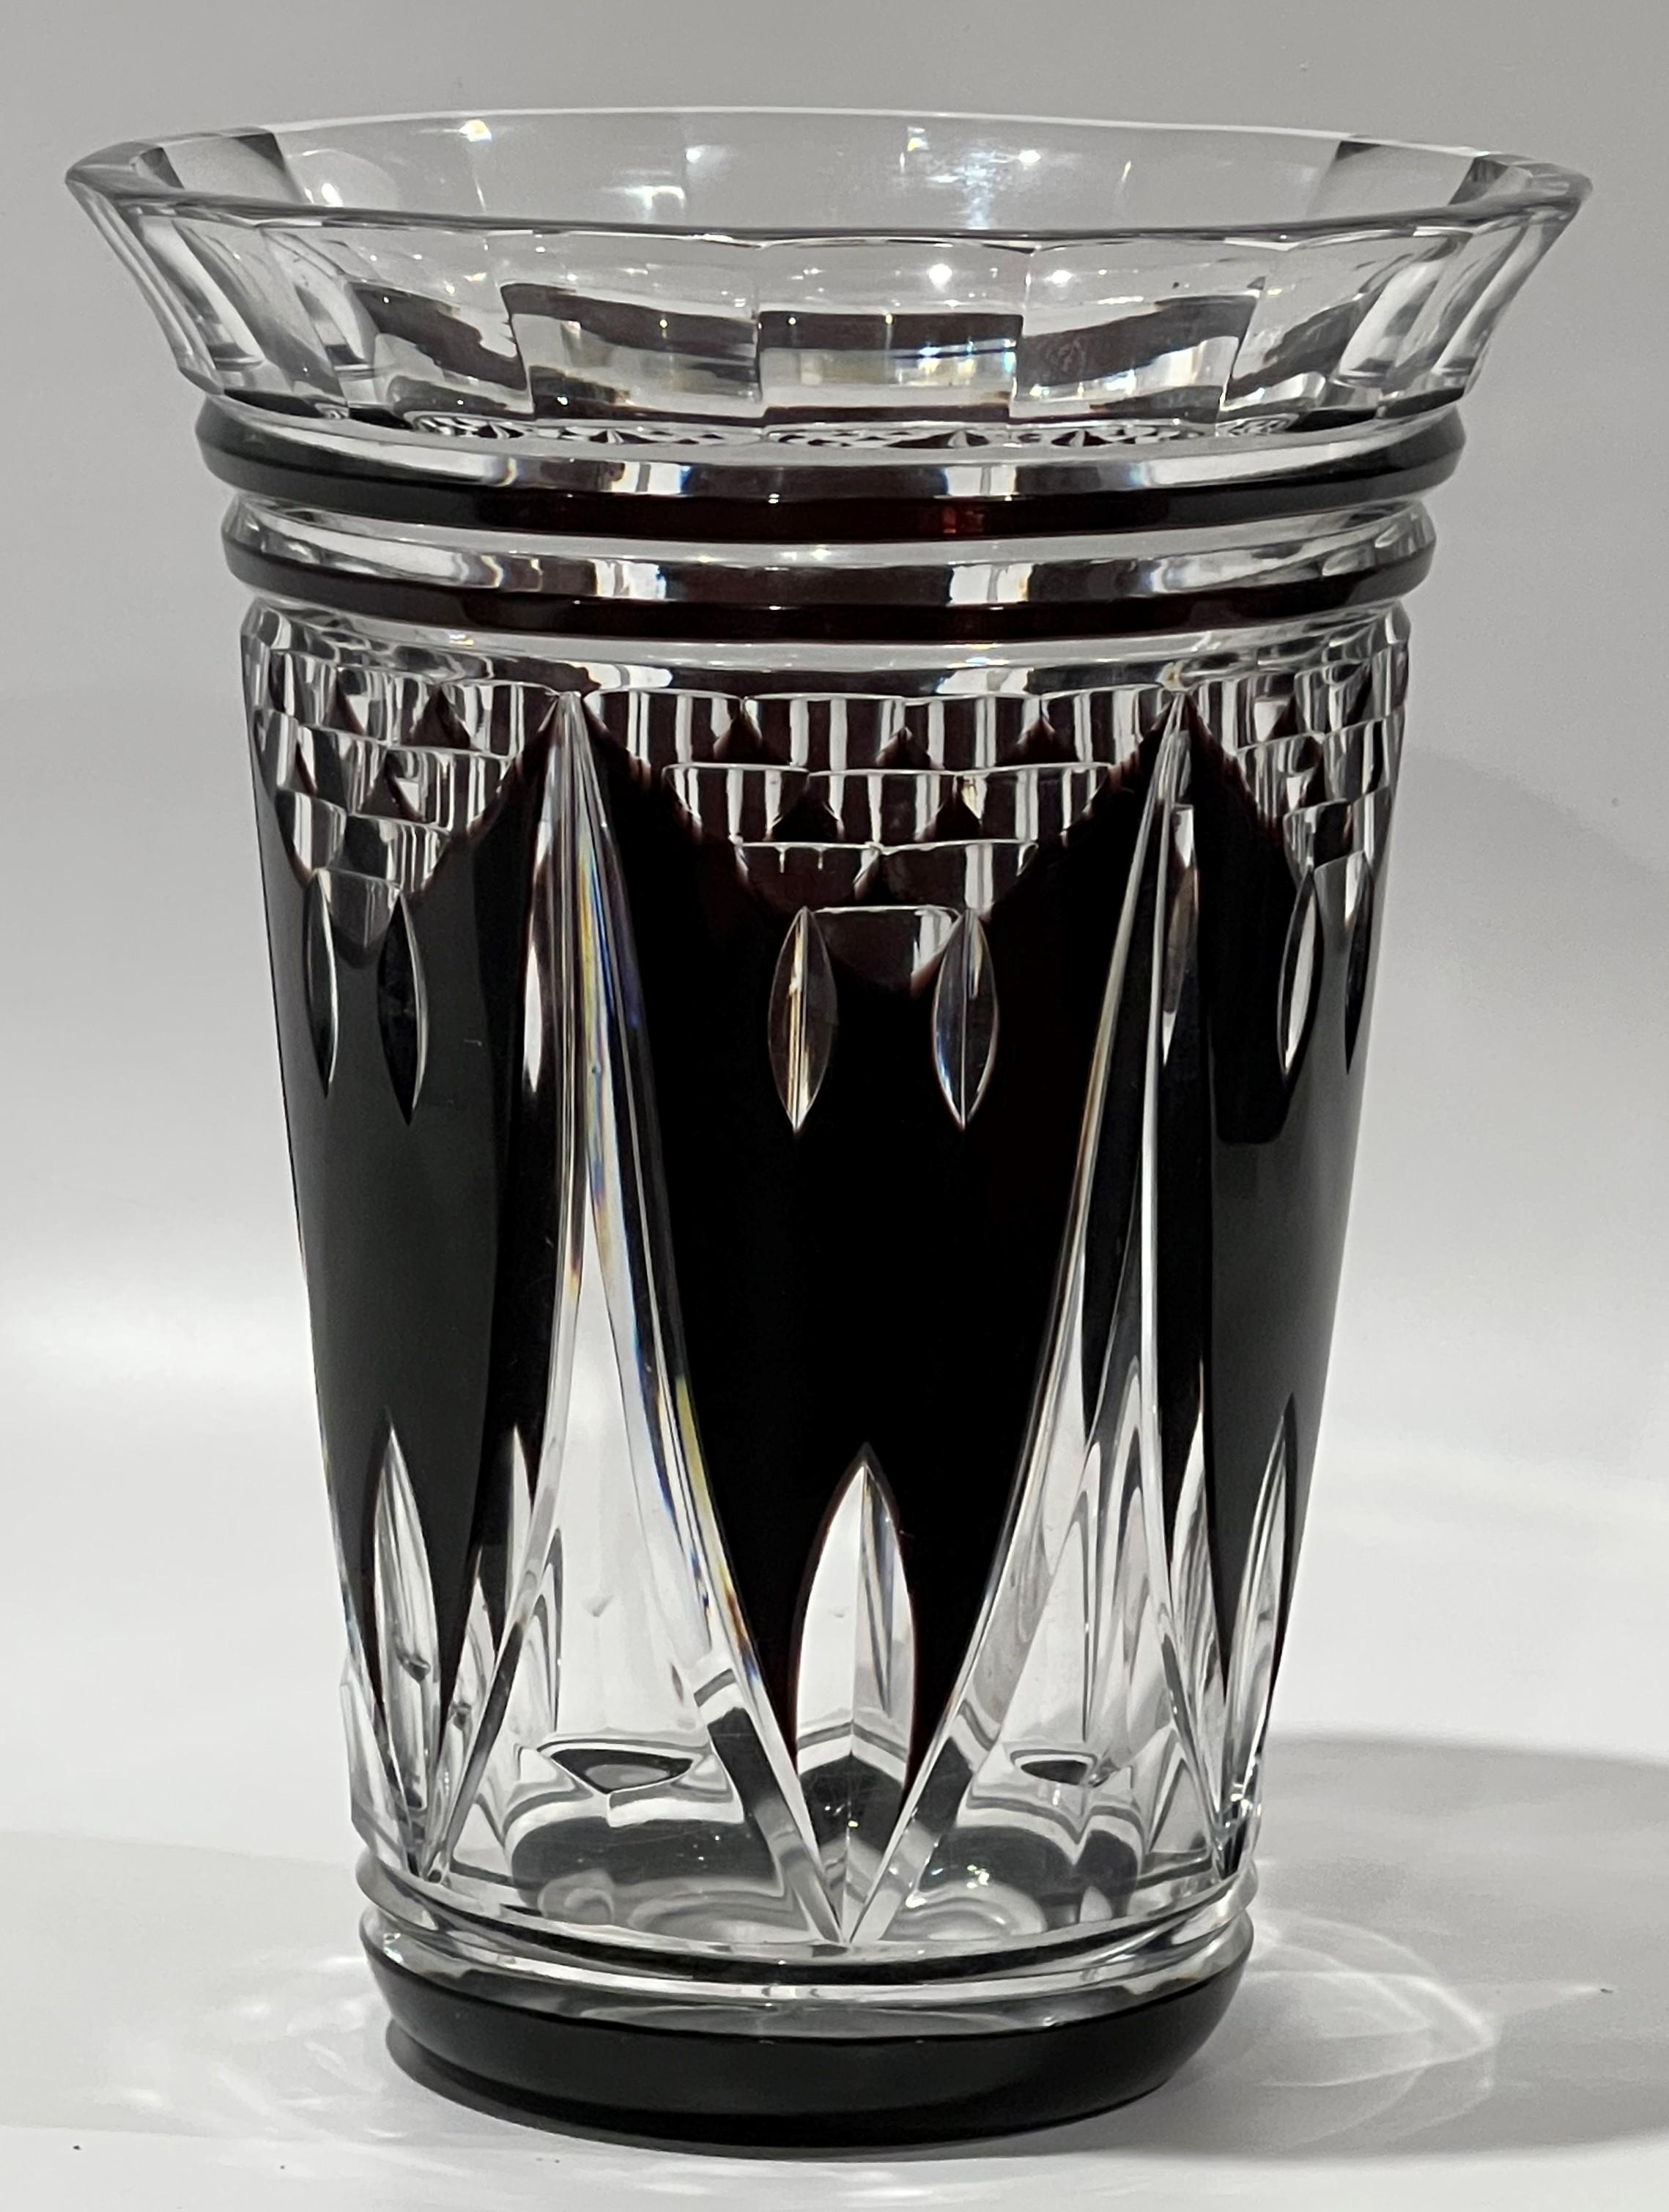 Art Deco Bat pattern cut crystal vase
Attributed to Charles Graffart (1873-1967) Val Saint Lambert circa 1928

Charles Graffart is described in the British Museum Curatorial notes as the most talented cutter at the factory and was known for